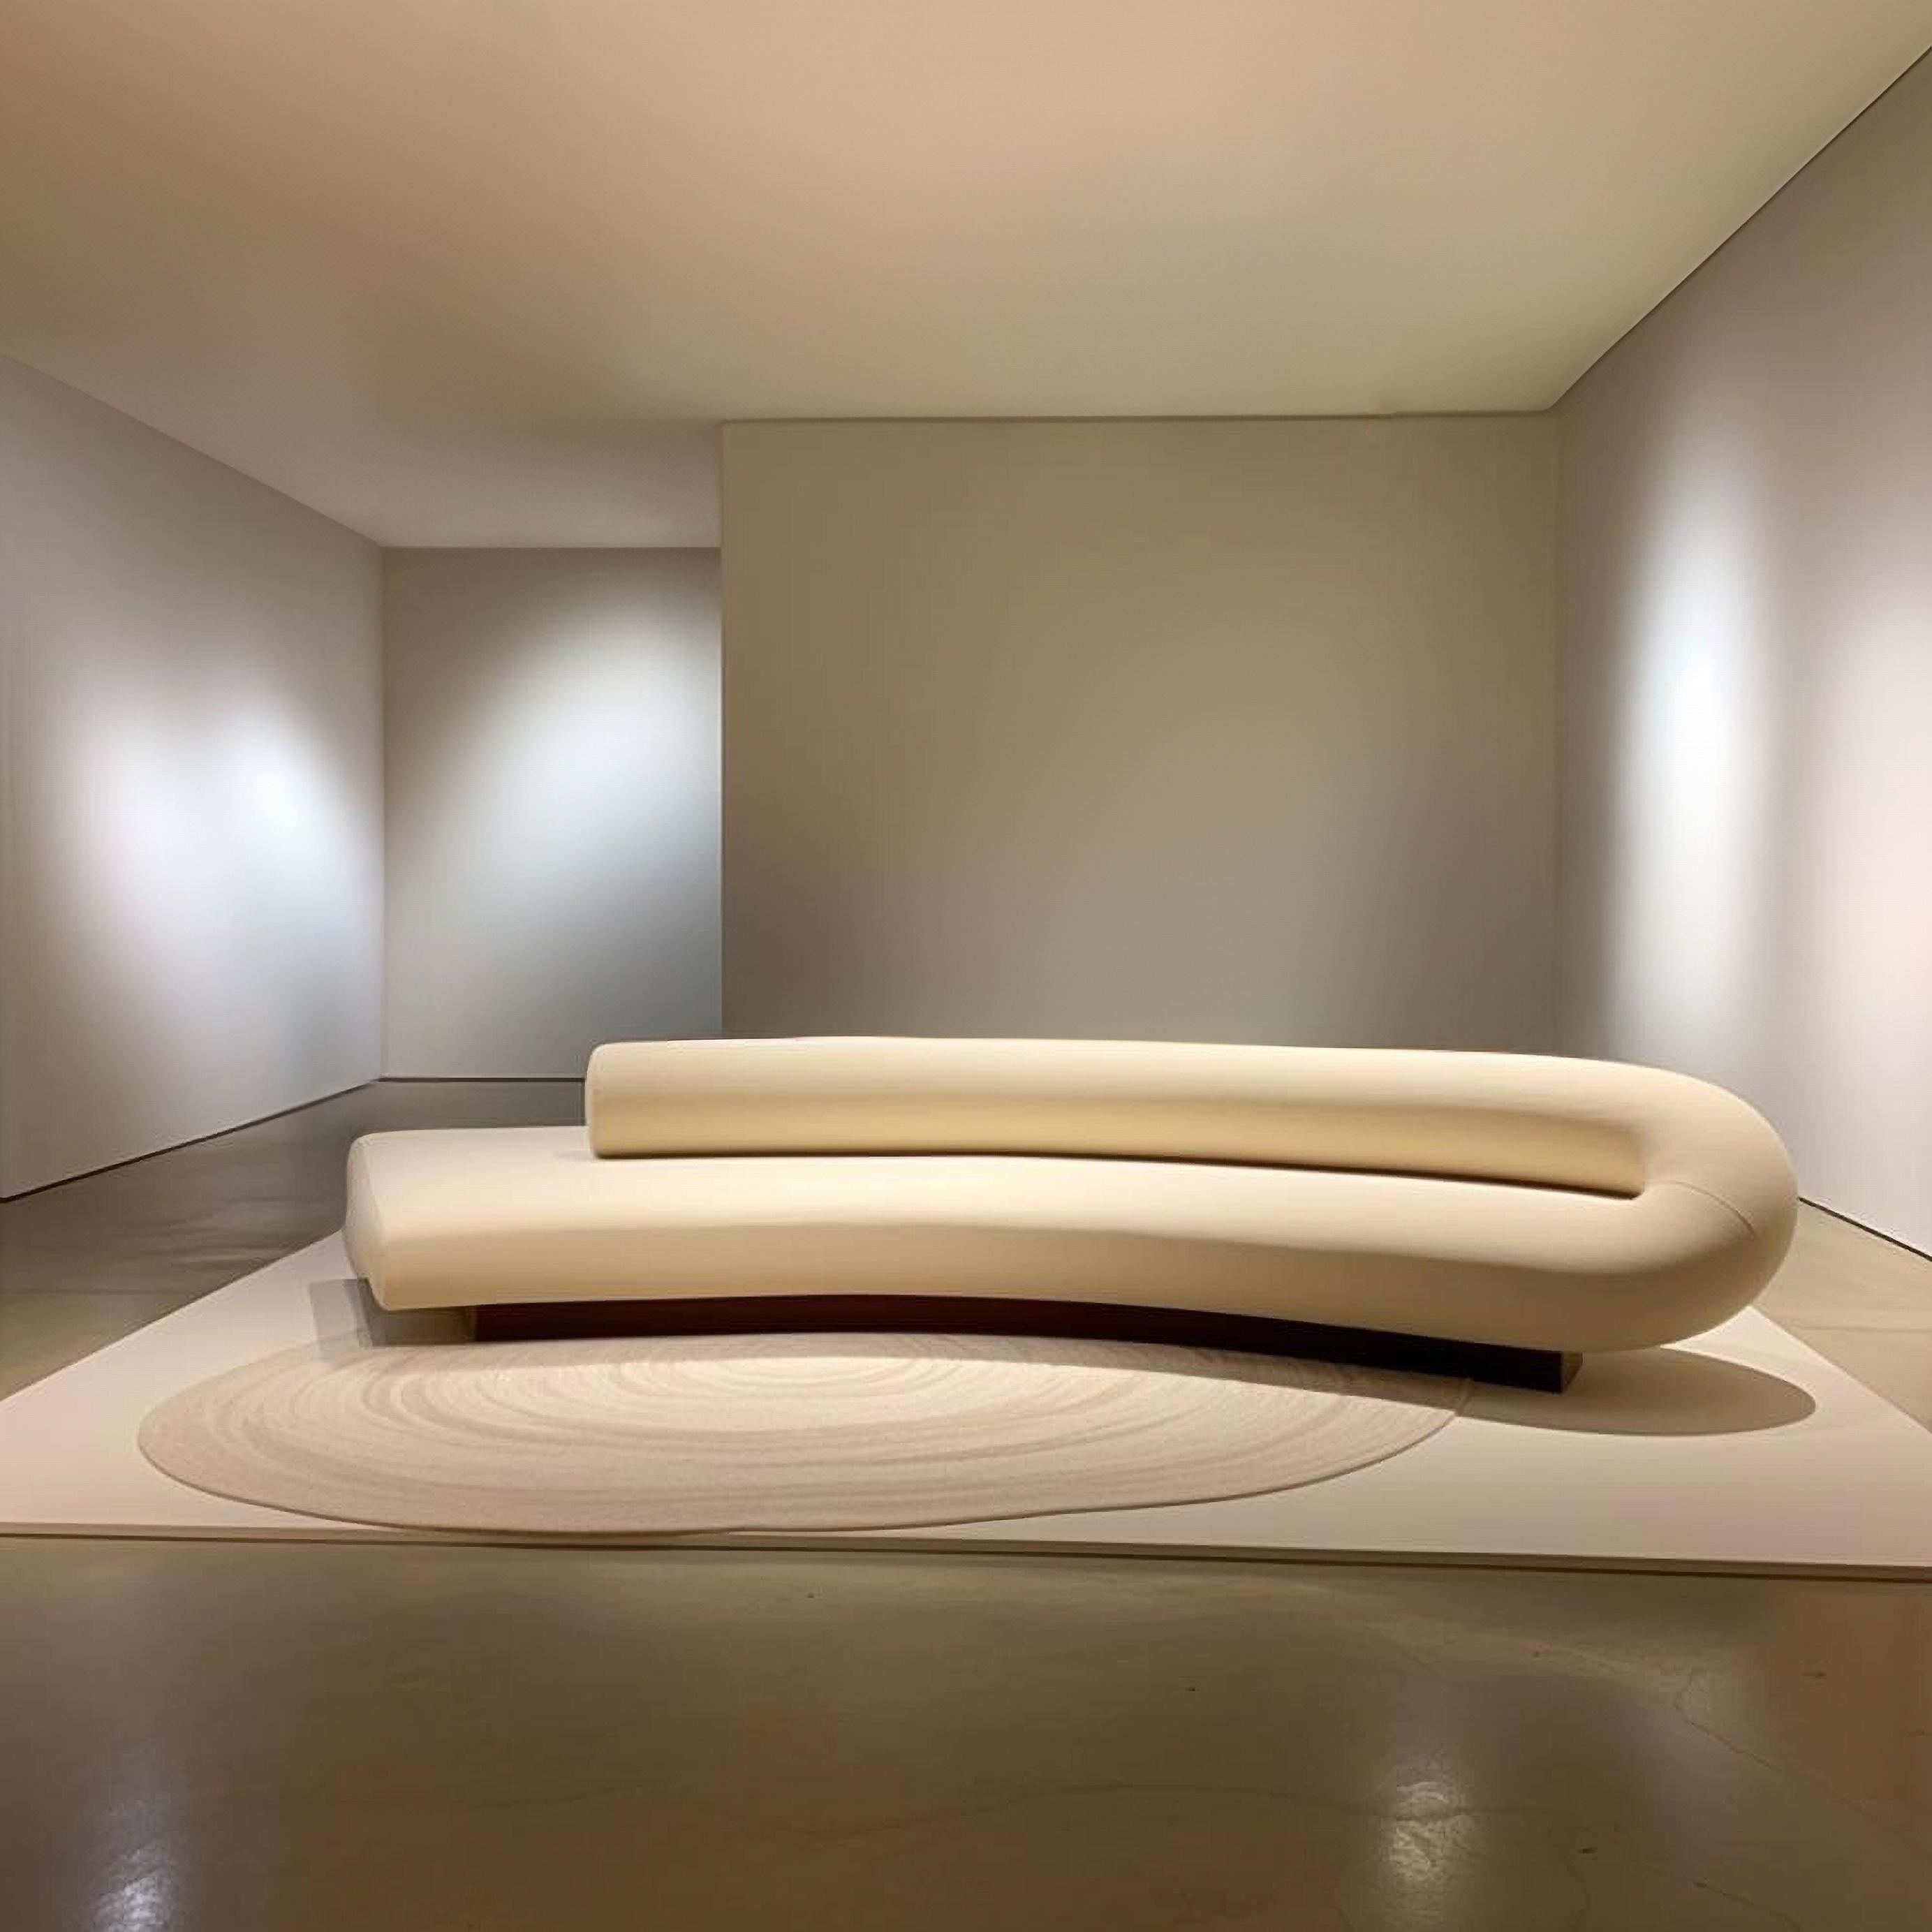 Drawing inspiration from the fascinating principles of morphogens, which govern the development of organic shapes in nature, this sofa represents a breakthrough in furniture design. Its contours and curves are carefully crafted to mimic the graceful